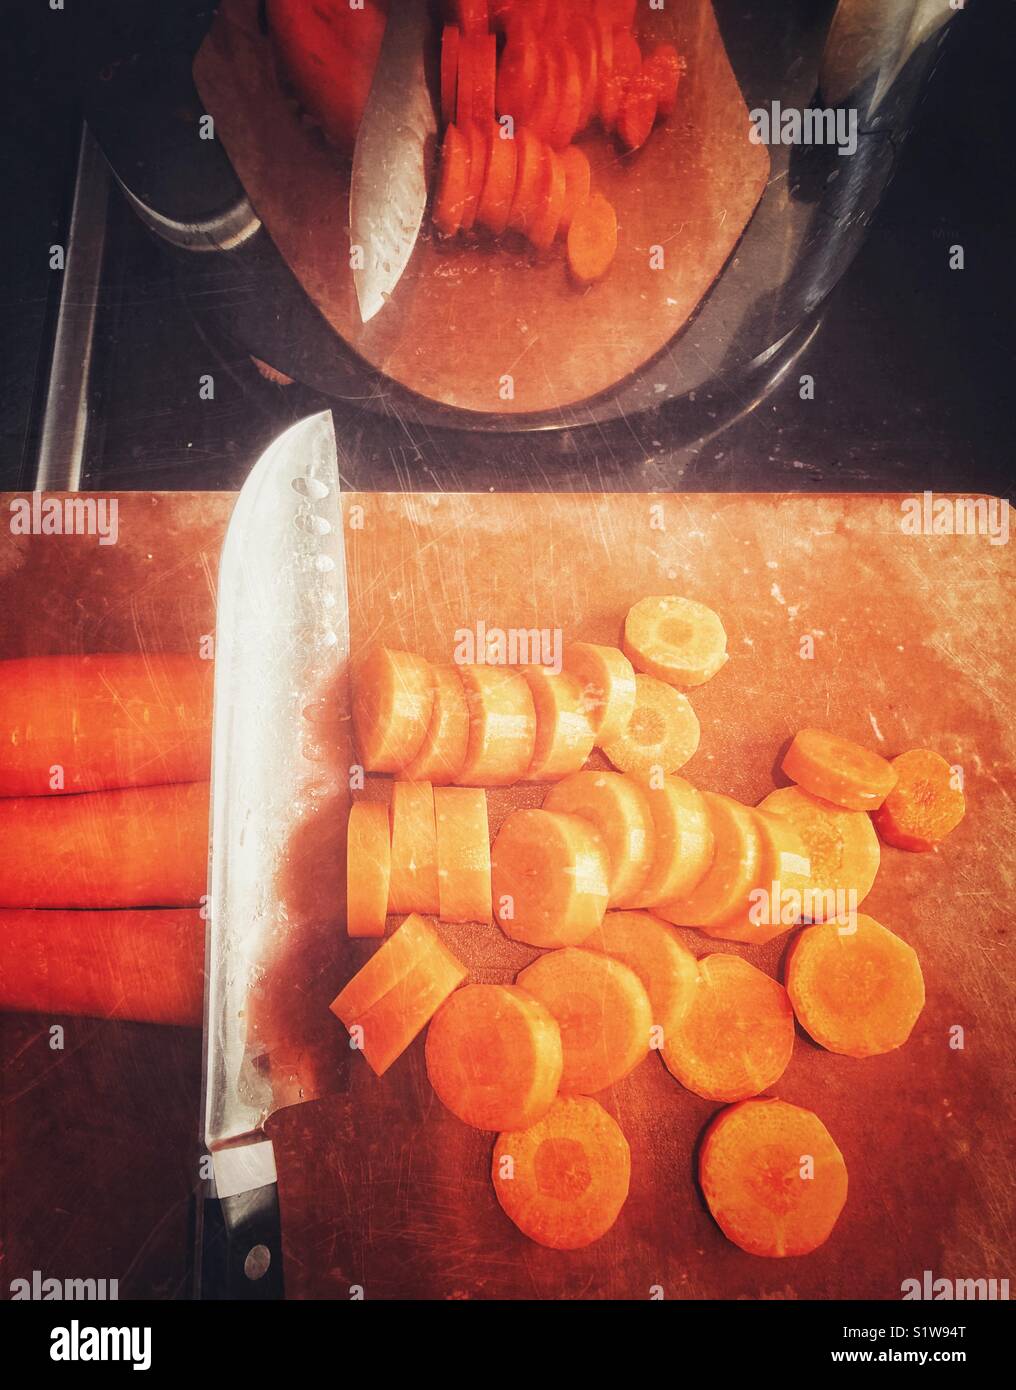 From above view of chopping fresh carrots with large chef’s knife on a brown cutting board with reflection in stainless steel pot above Stock Photo